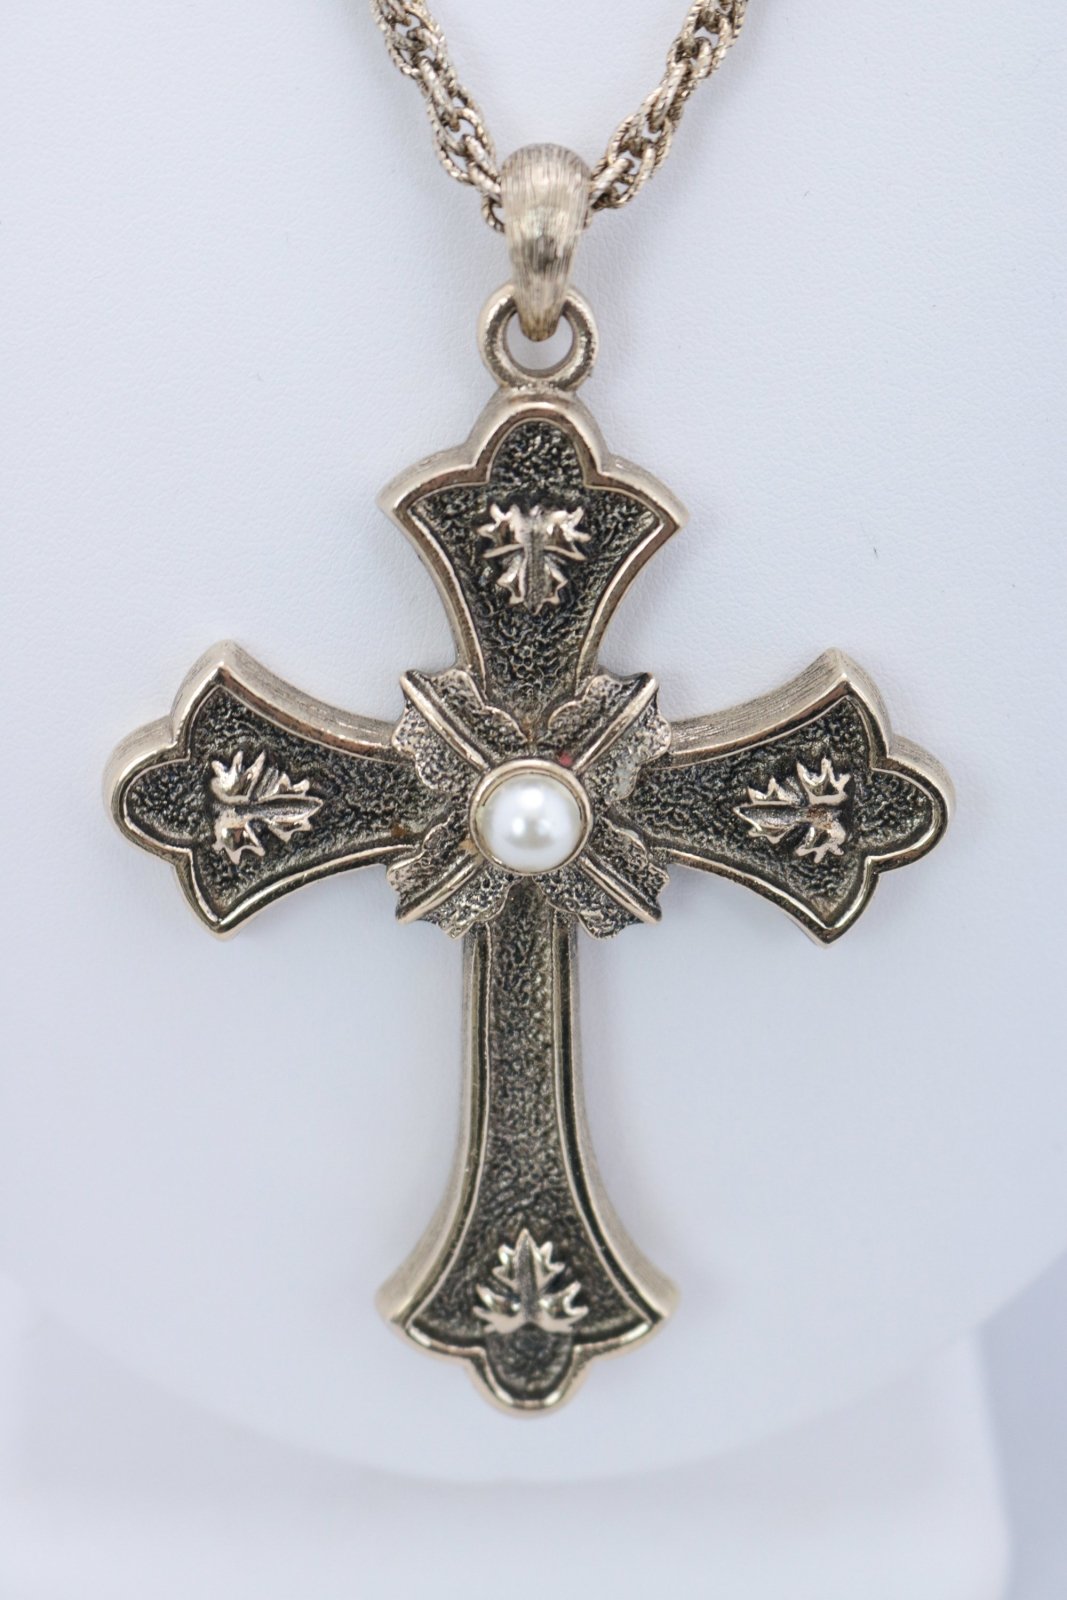 1975 Limited Edition Sarah Coventry Peace Cross Necklace - Floria Vintage